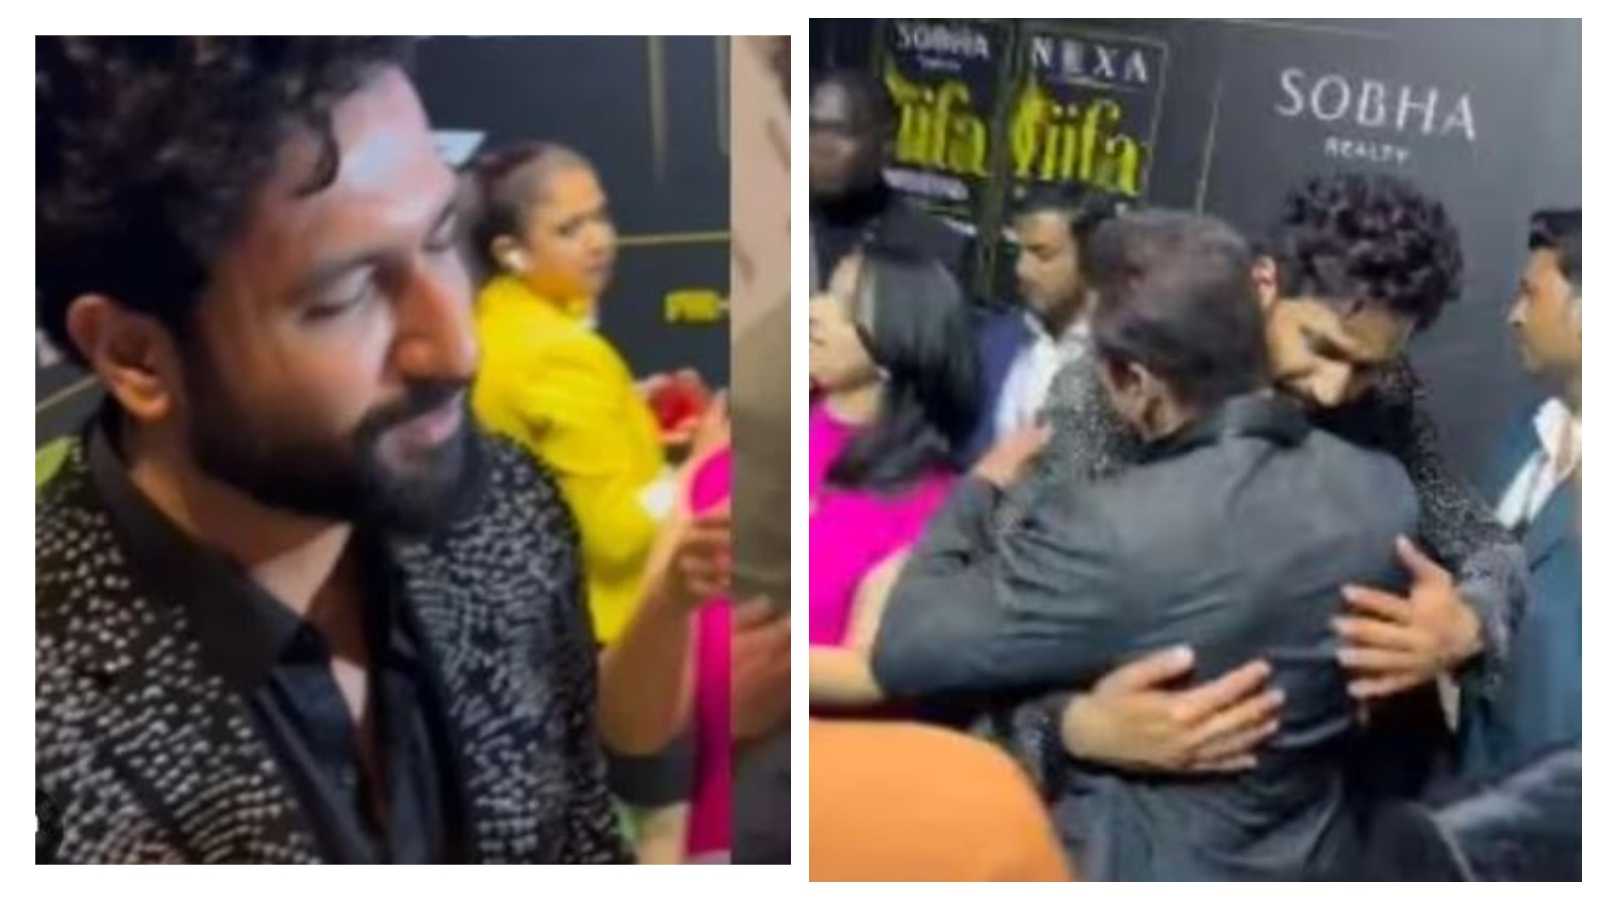 Vicky Kaushal reacts to Salman Khan’s security allegedly pushing him; latter shares hug with him after push incident